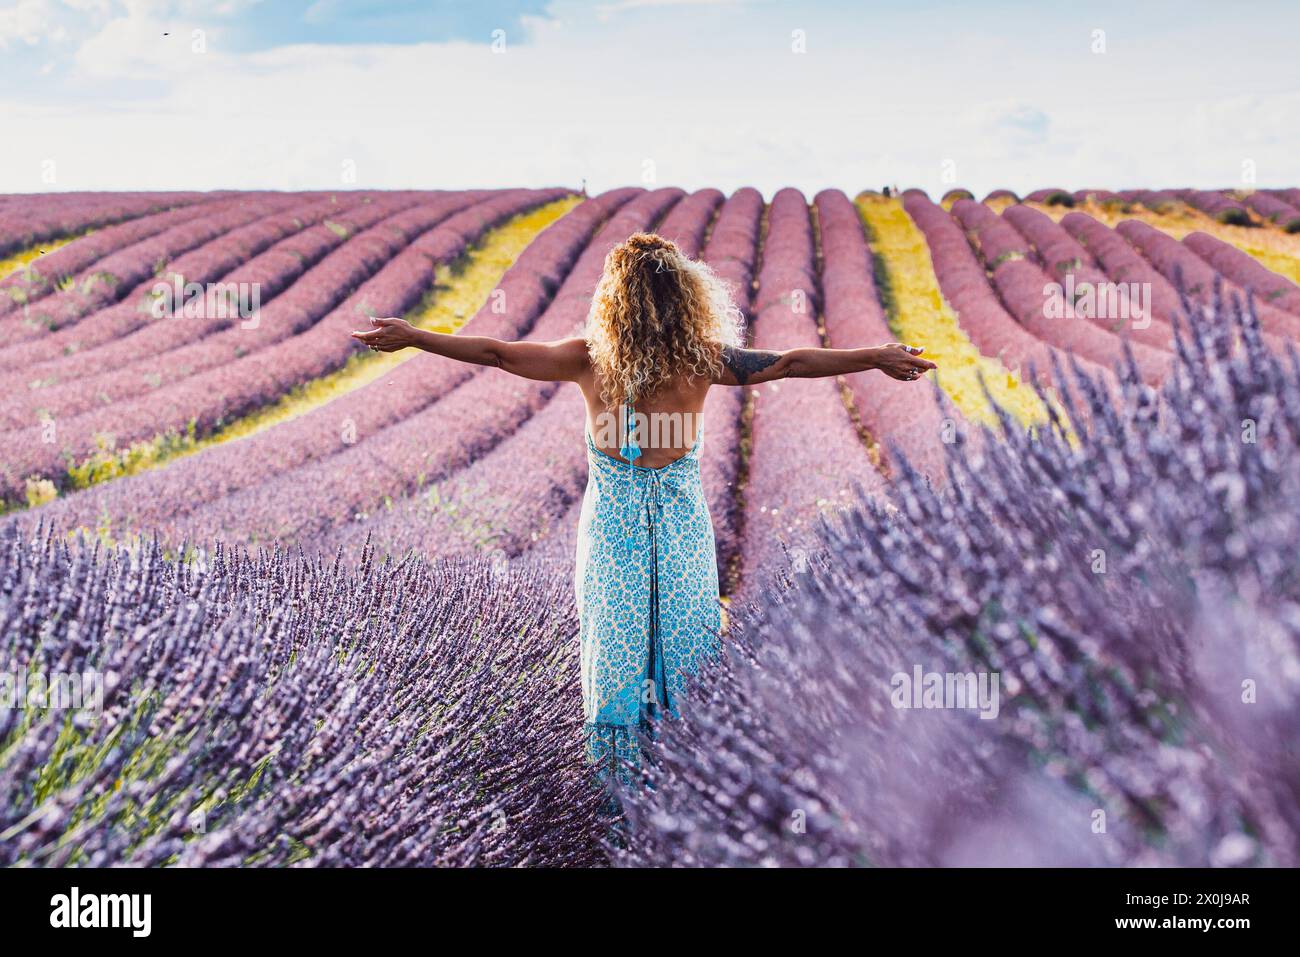 Happy and free traveler woman outstretching arms and enjoy amazing nature landscape in the middle of a violet lavender field flowers scenic destination. Concept of people and travel lifestyle Stock Photo